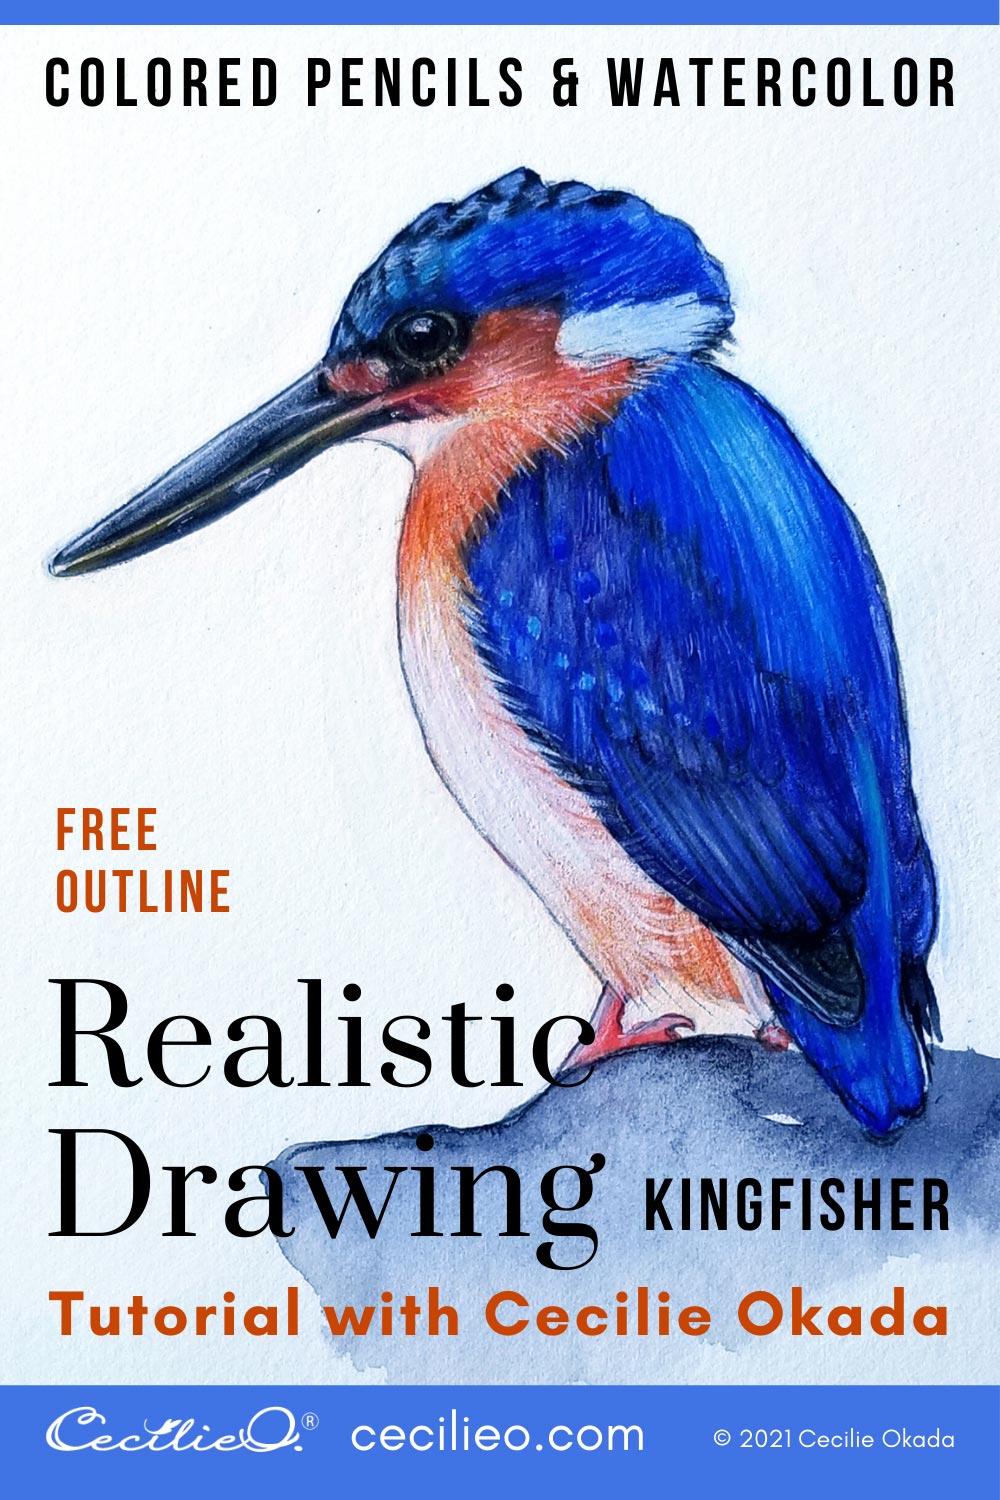 Kingfisher bird done in prismacolor pencils. By Shannon #inkpixie |  Kingfisher art, Bird drawings, Bird watercolor paintings